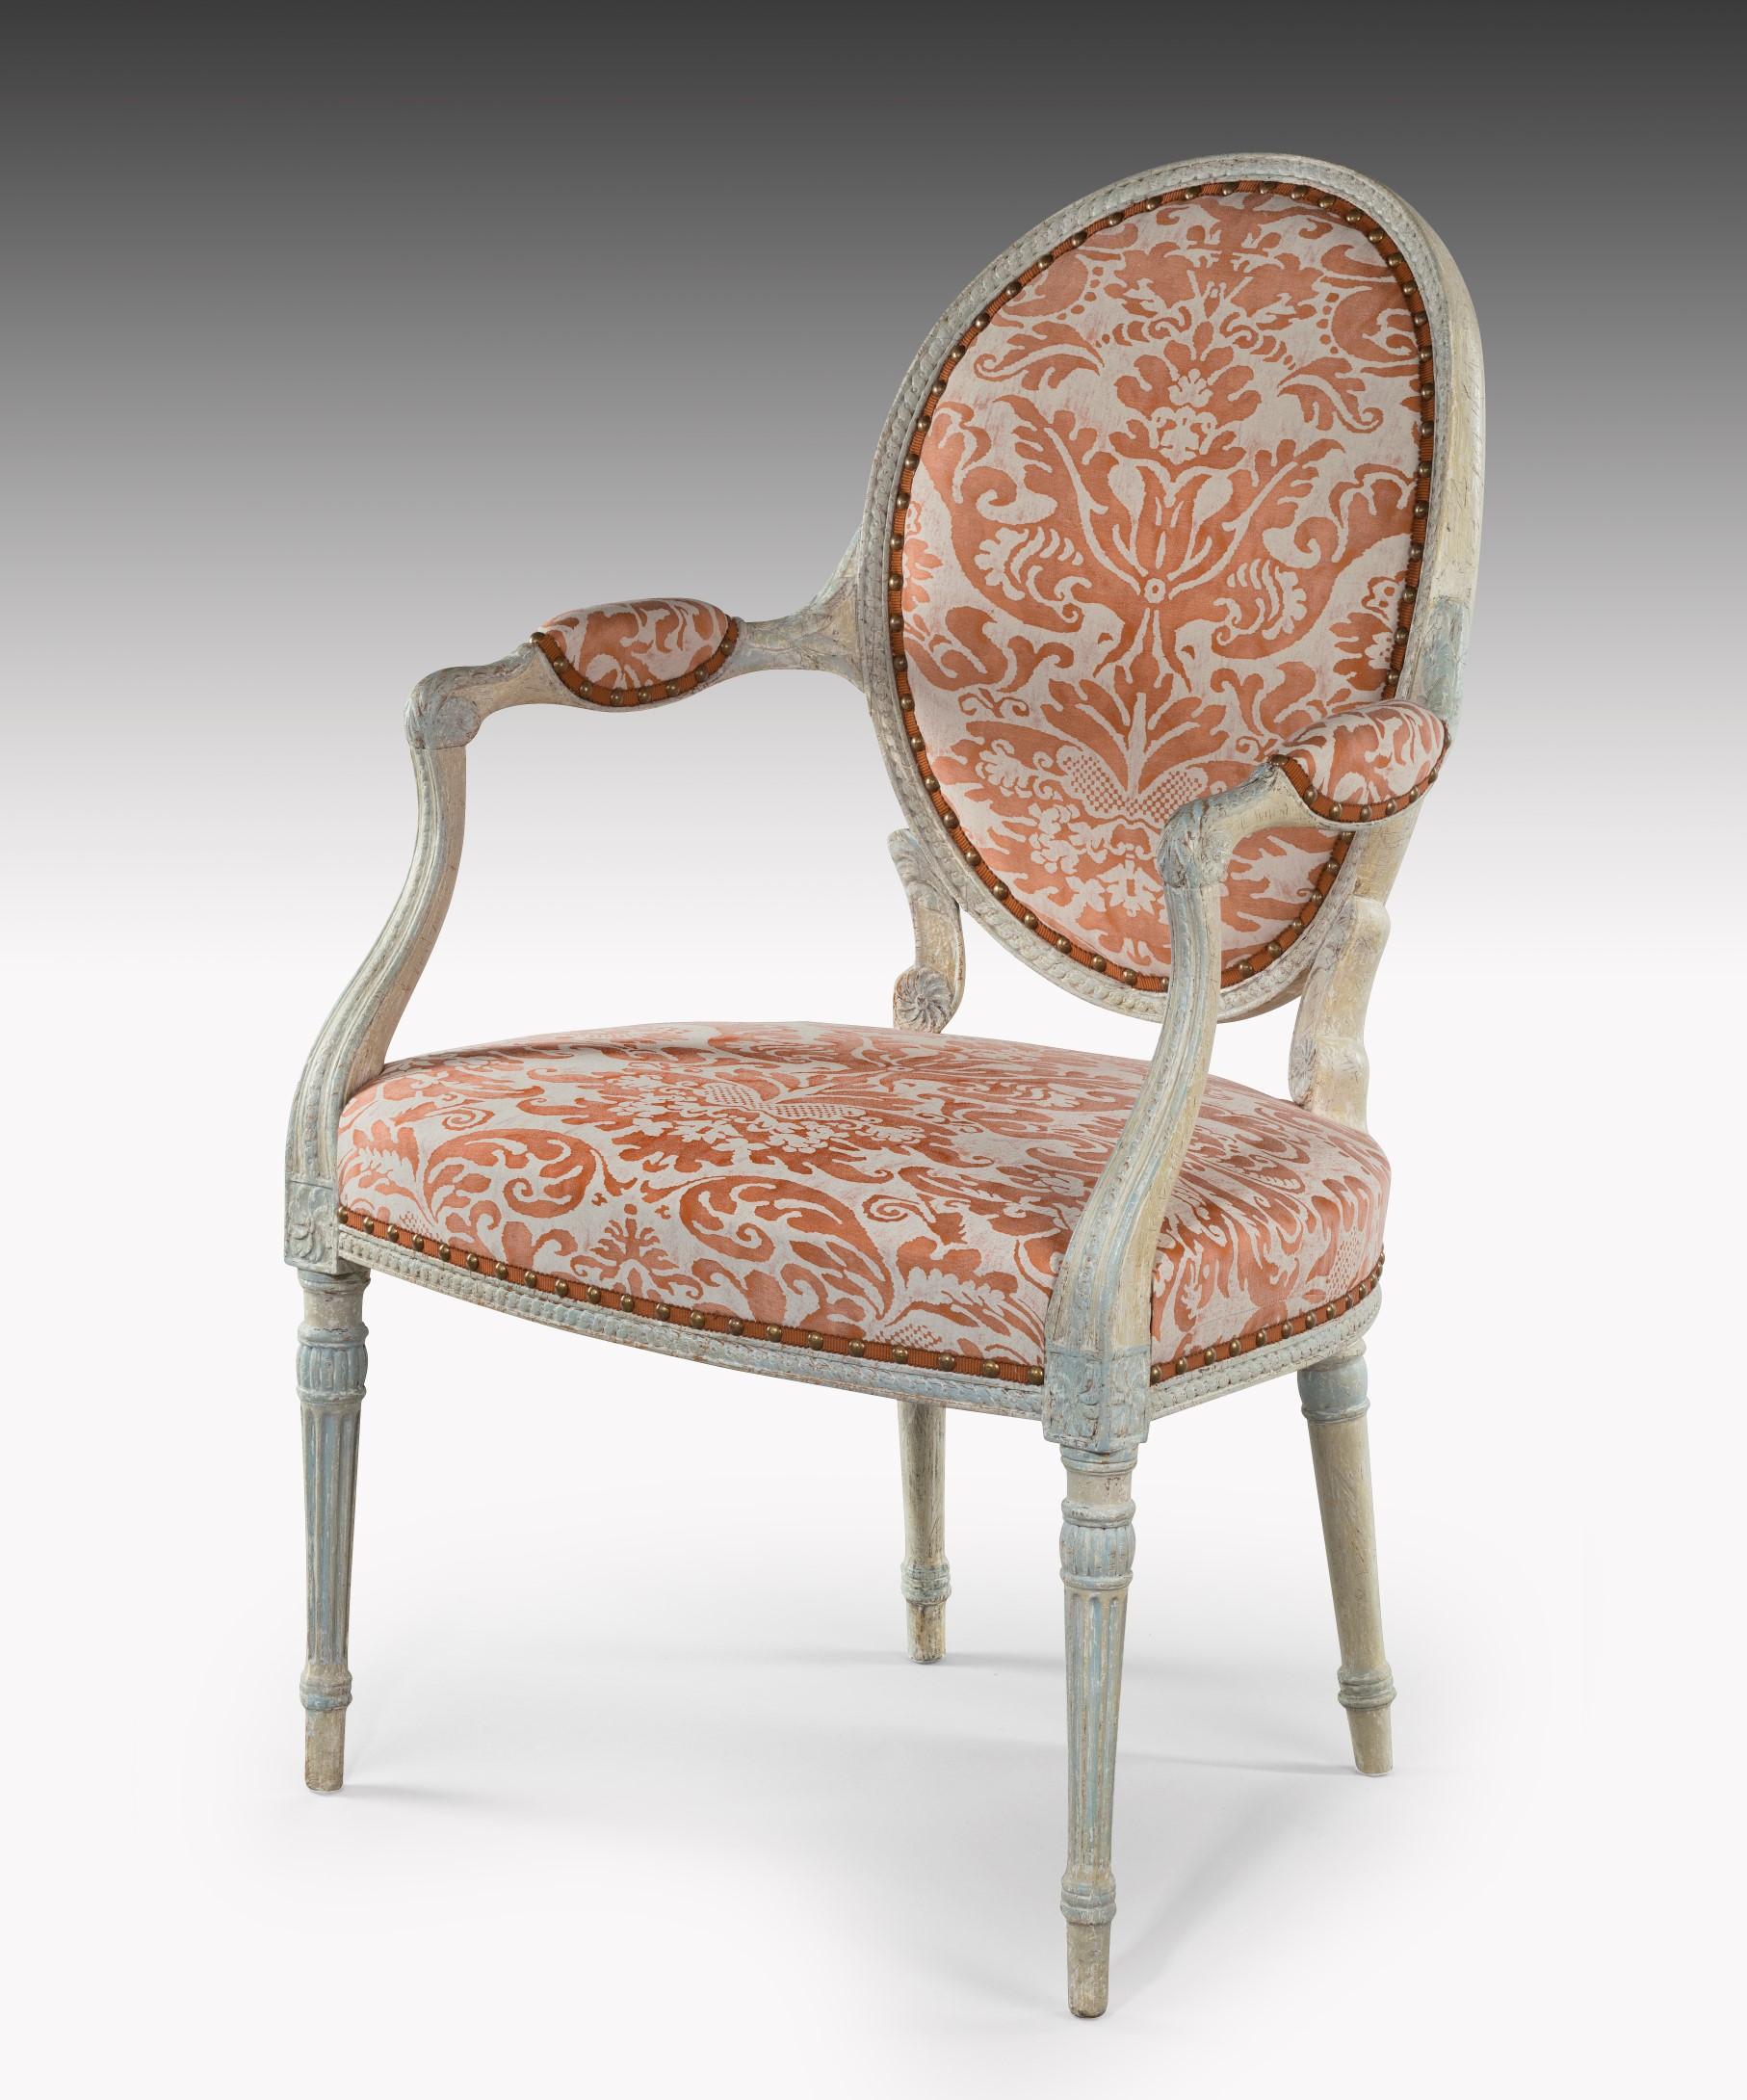 An elegant George III Adam period painted salon armchair; the oval window pane back carved with a guilloche moulding above elegantly swept arms which are carved with acanthus leaves and have upholstered arm pads; the upholstered seat with a